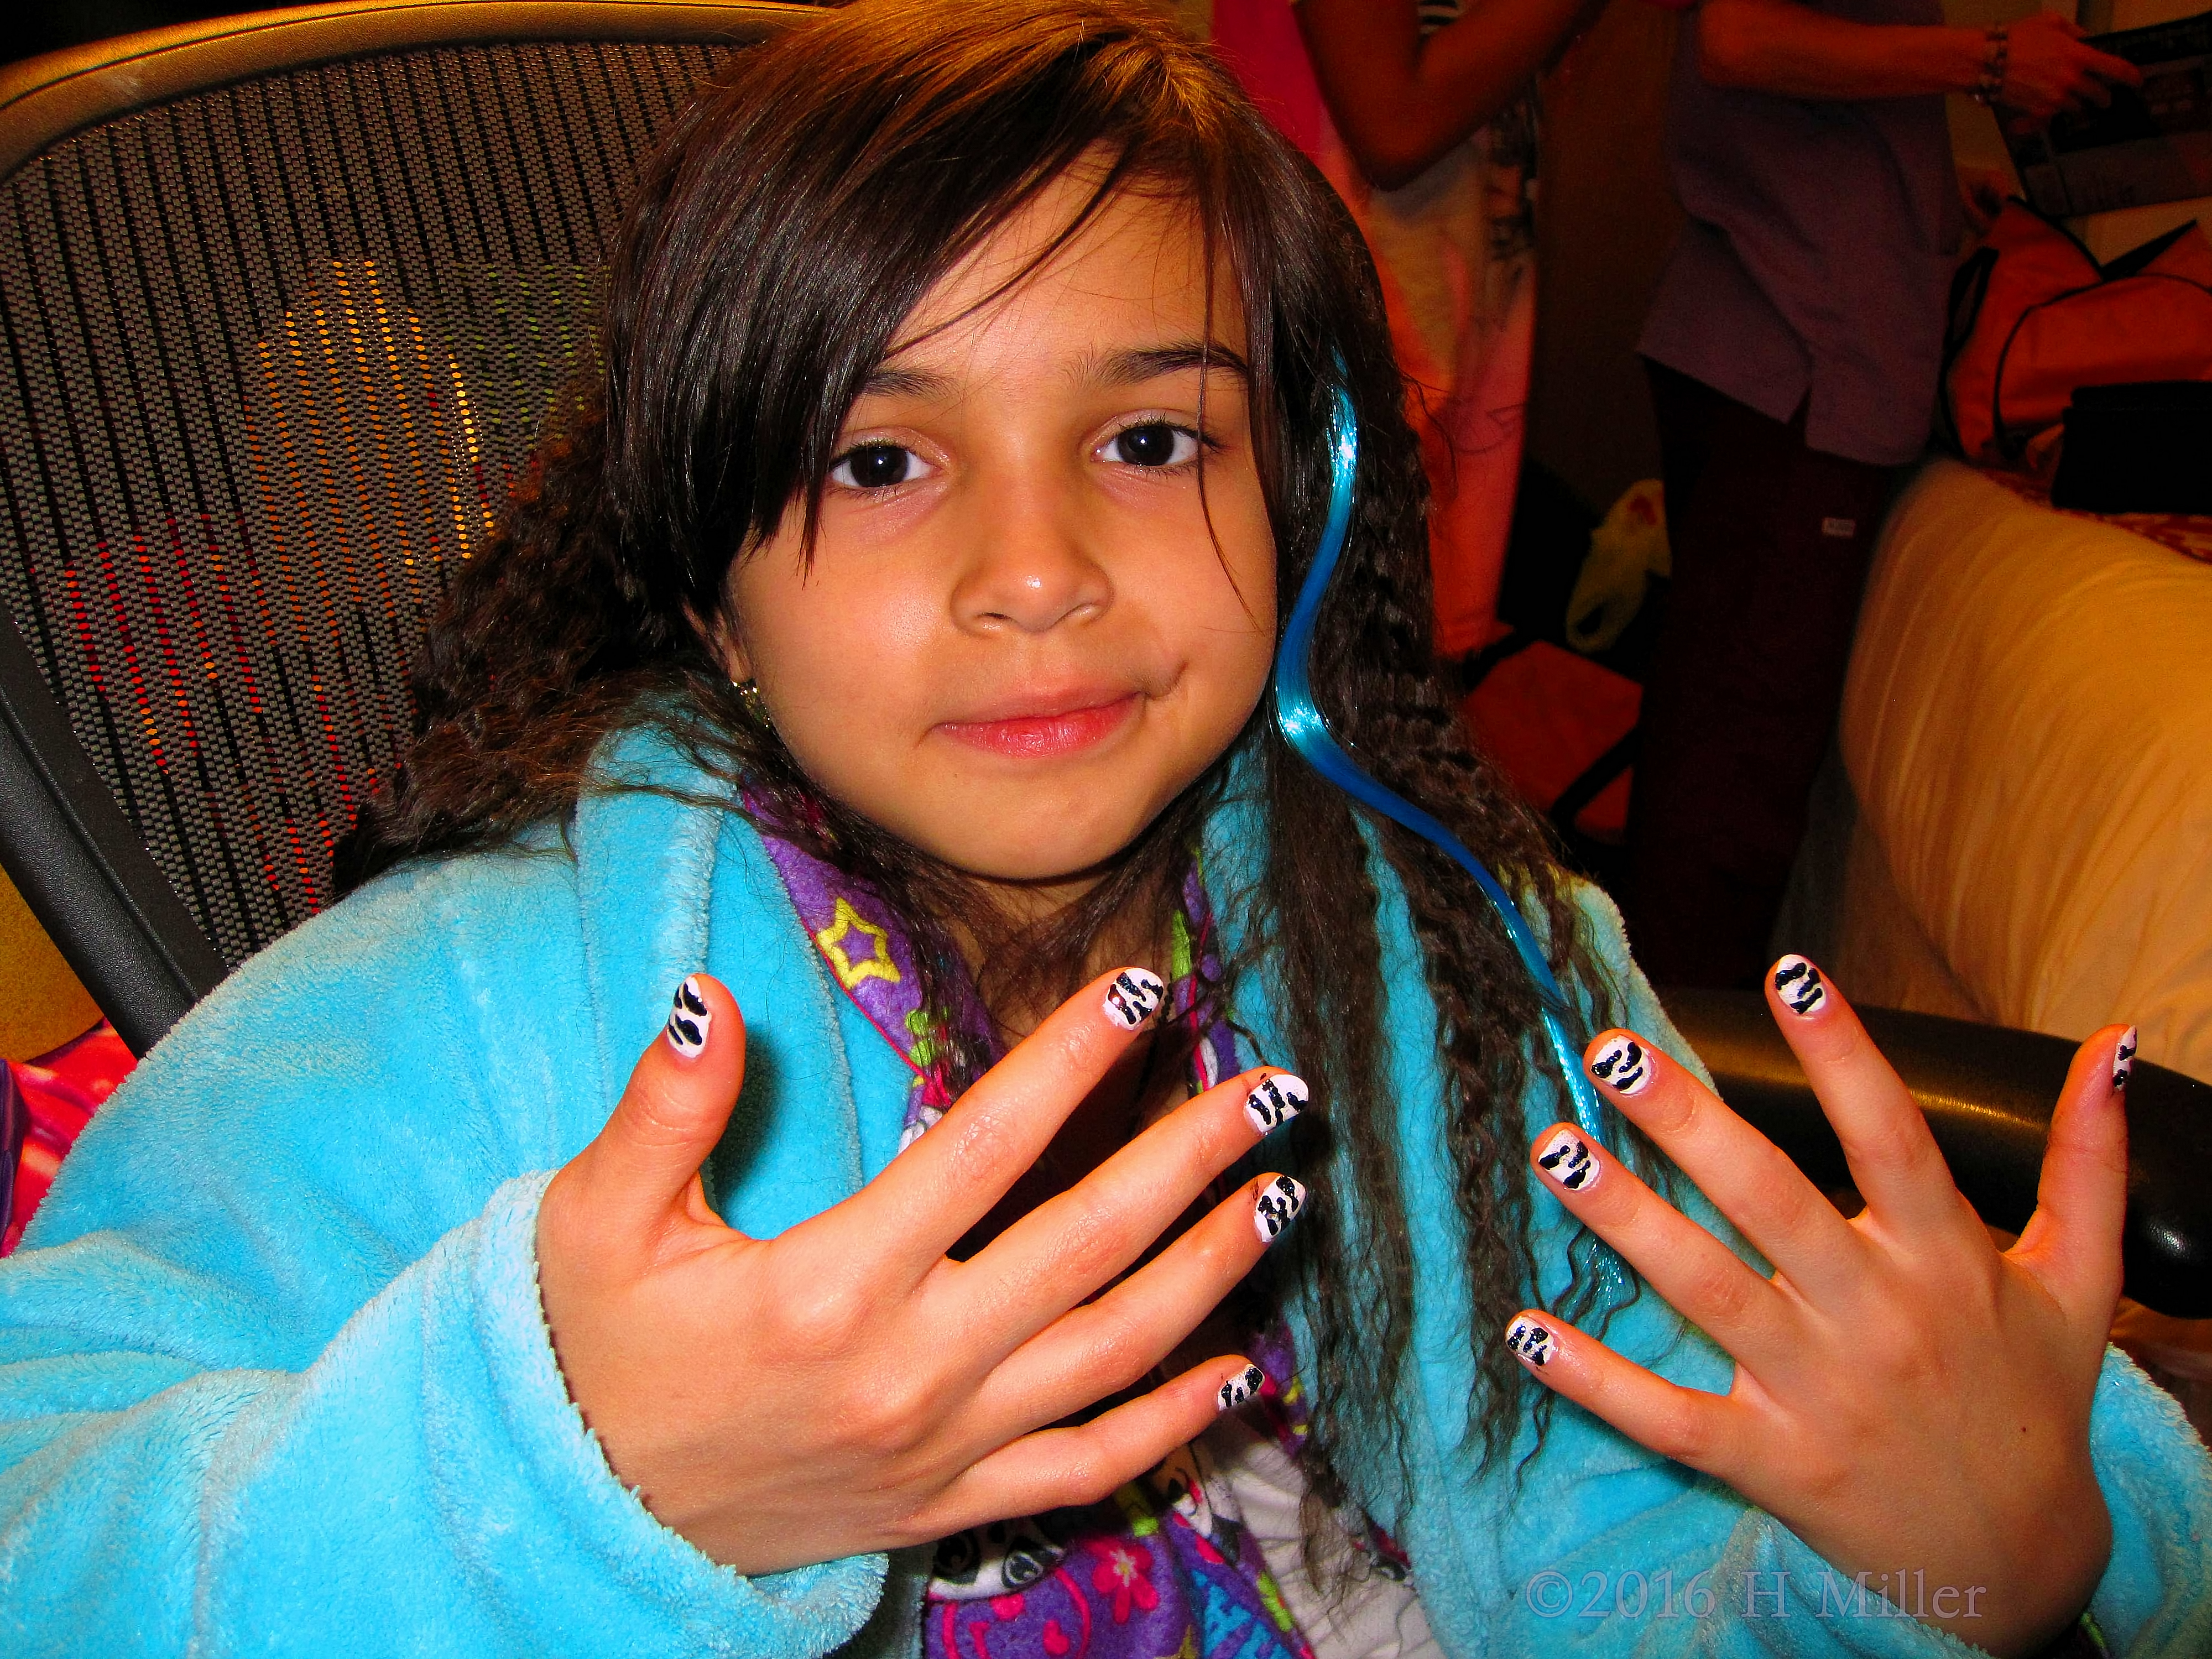 Zebra Nail Design On This Girls Manicure With A Blue Spa Robe 